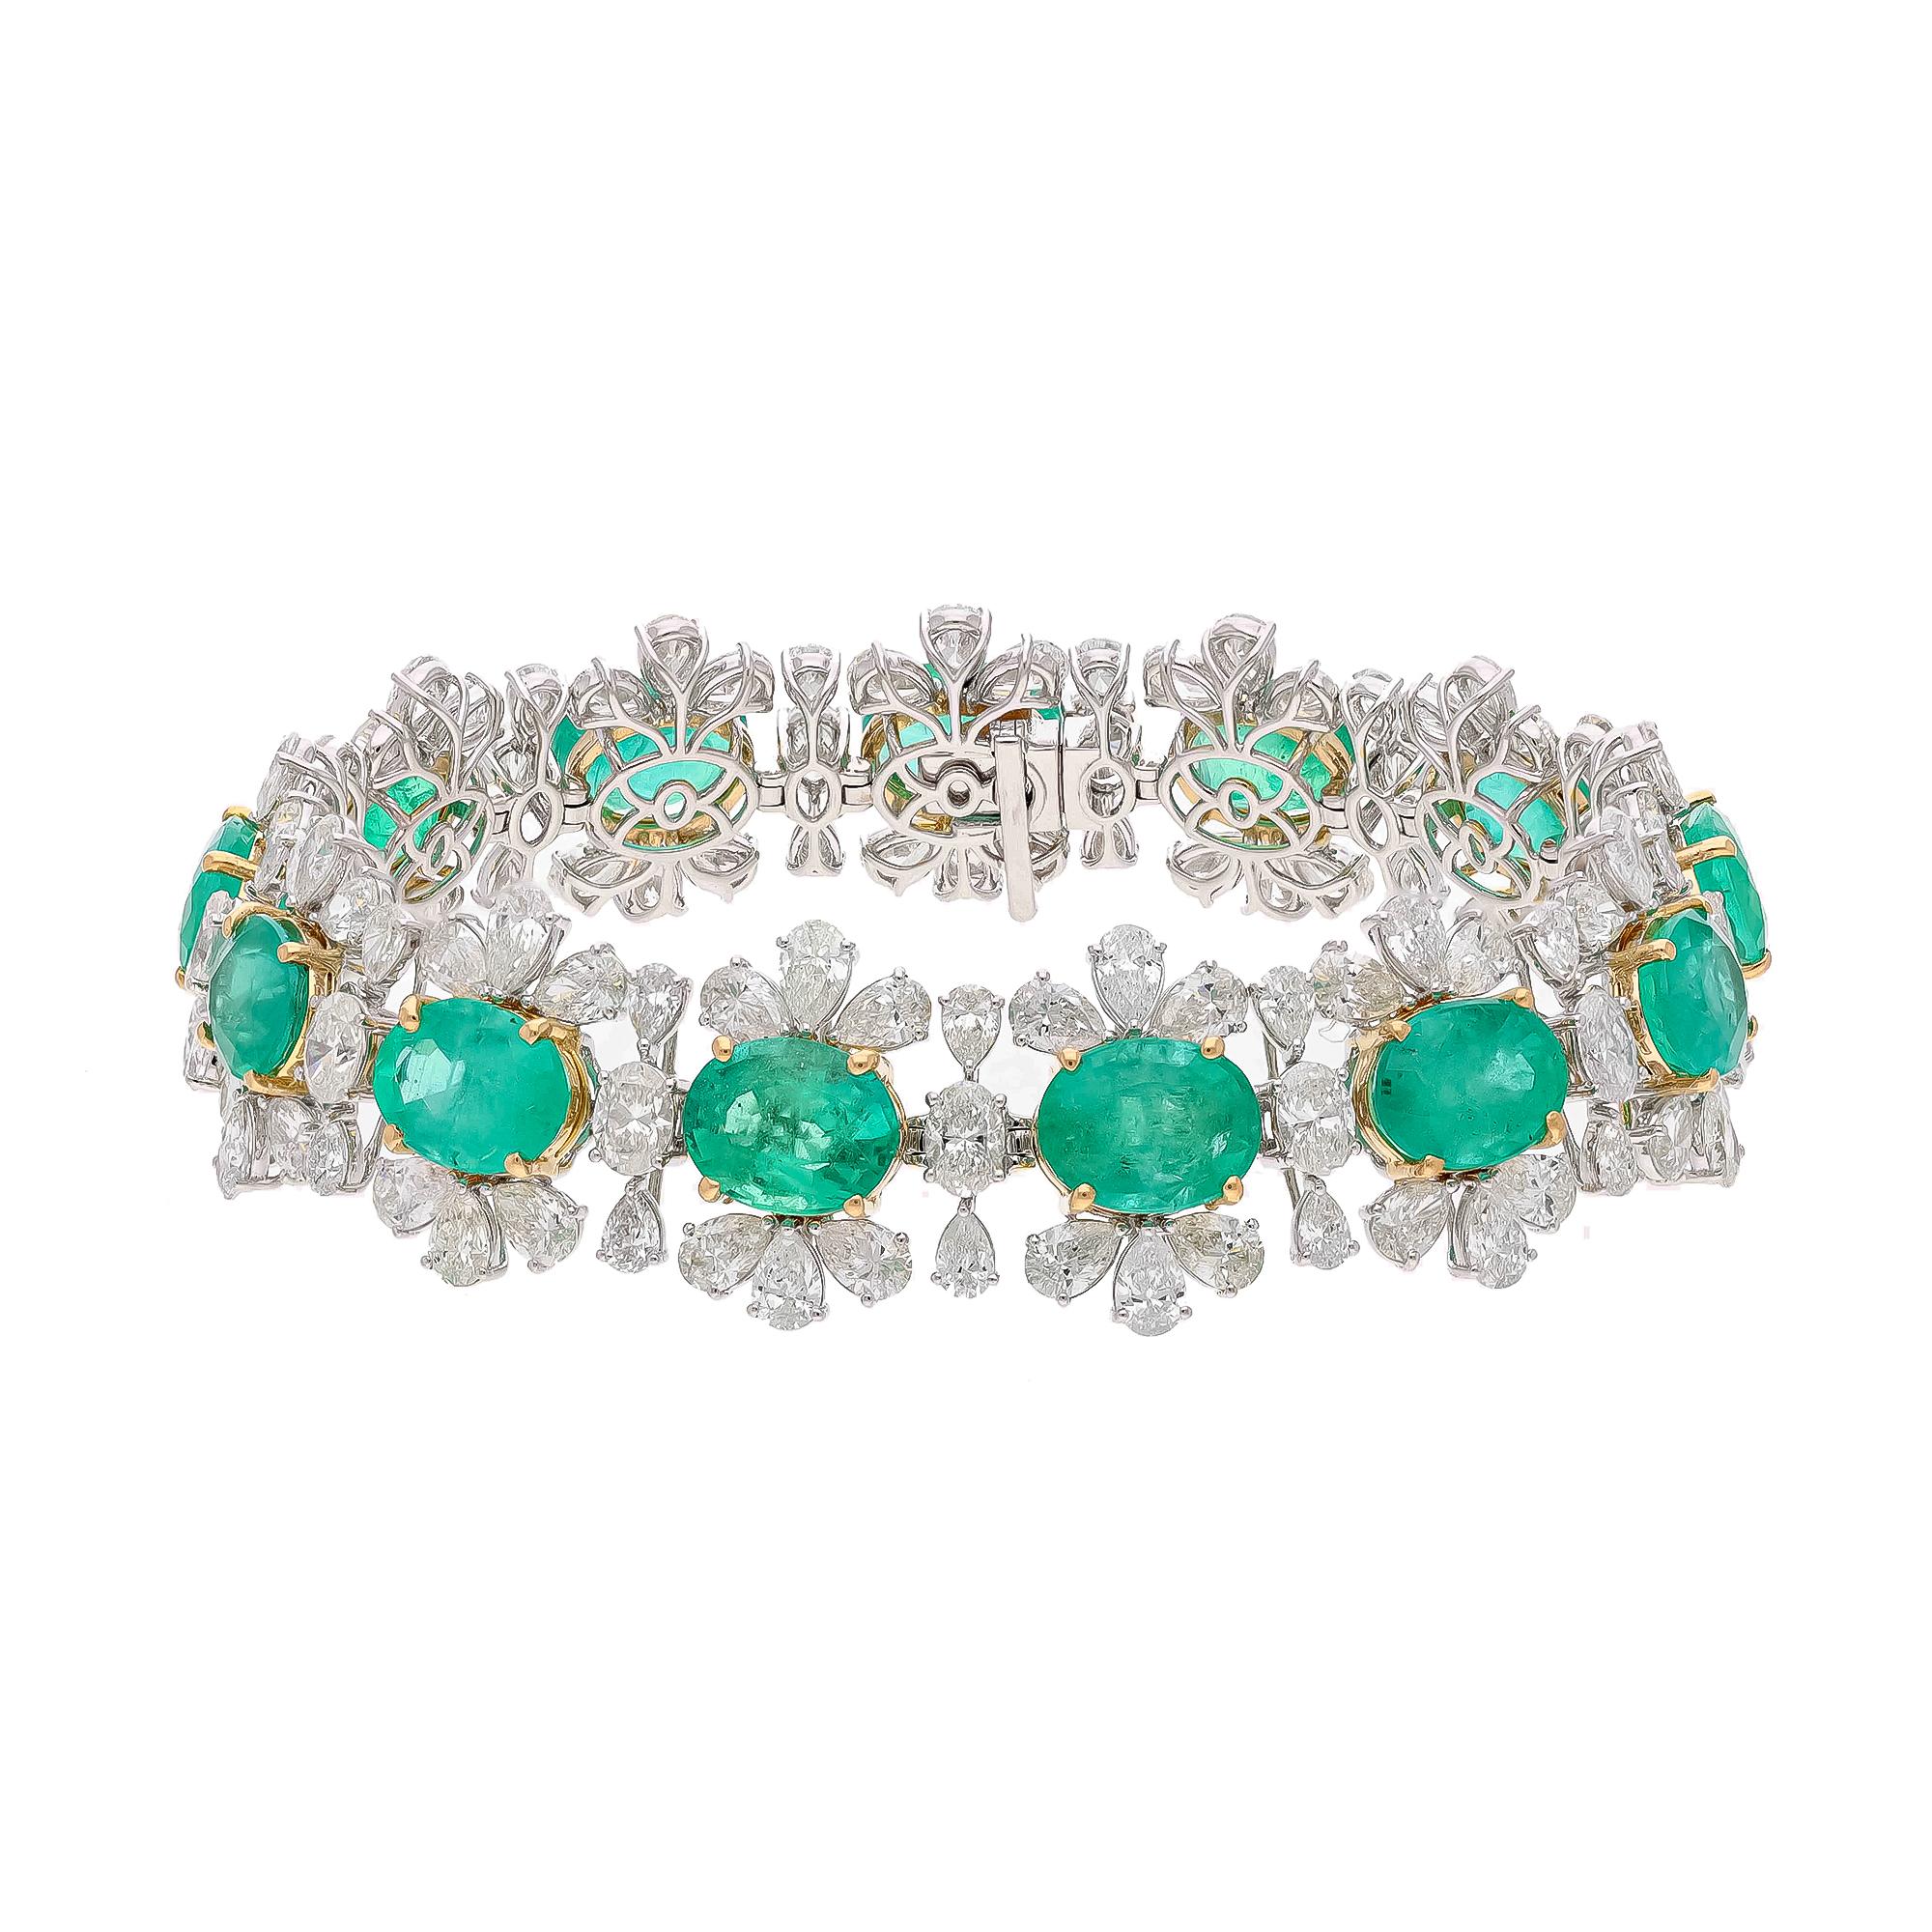 Mixed Cut Natural Zambian Emerald Bracelet with Diamond and 18k Gold For Sale